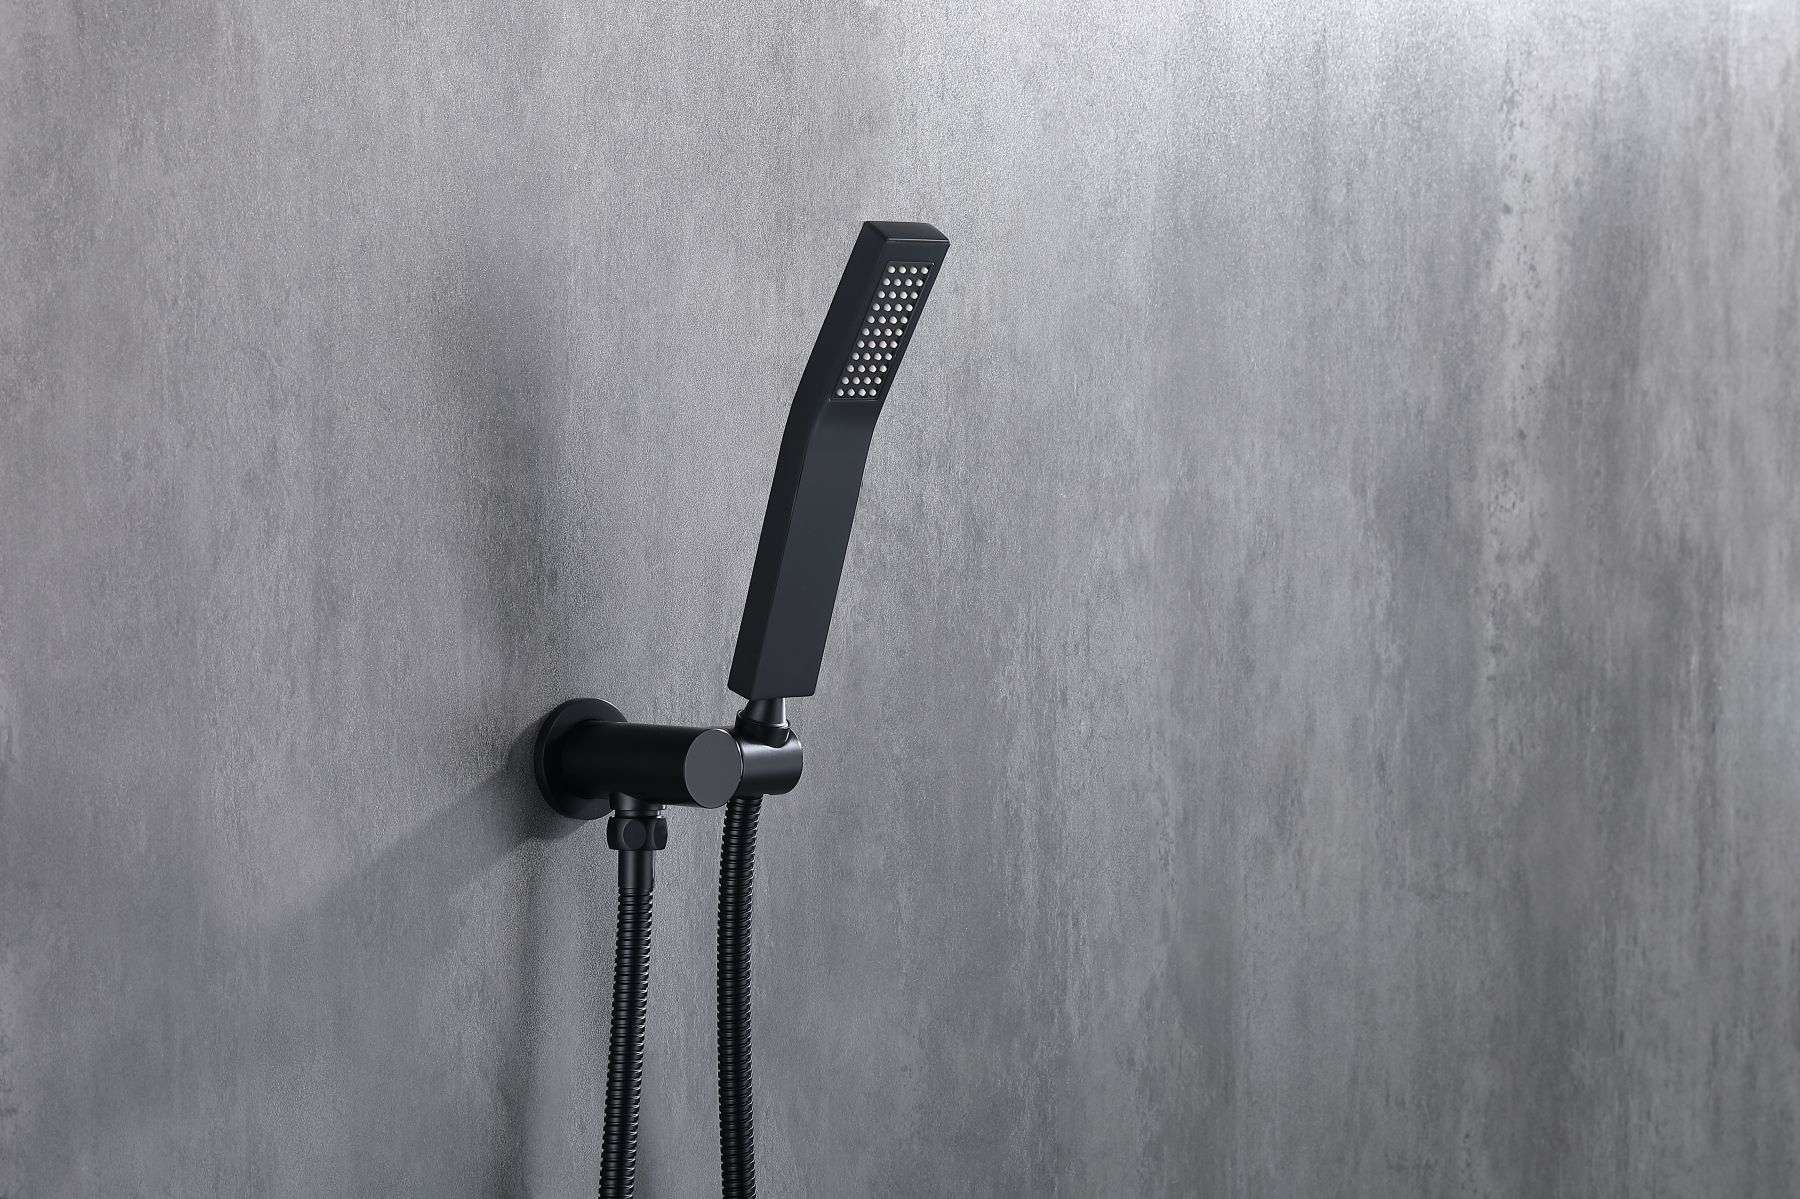 Concealed Shower Mixer with Rain Shower